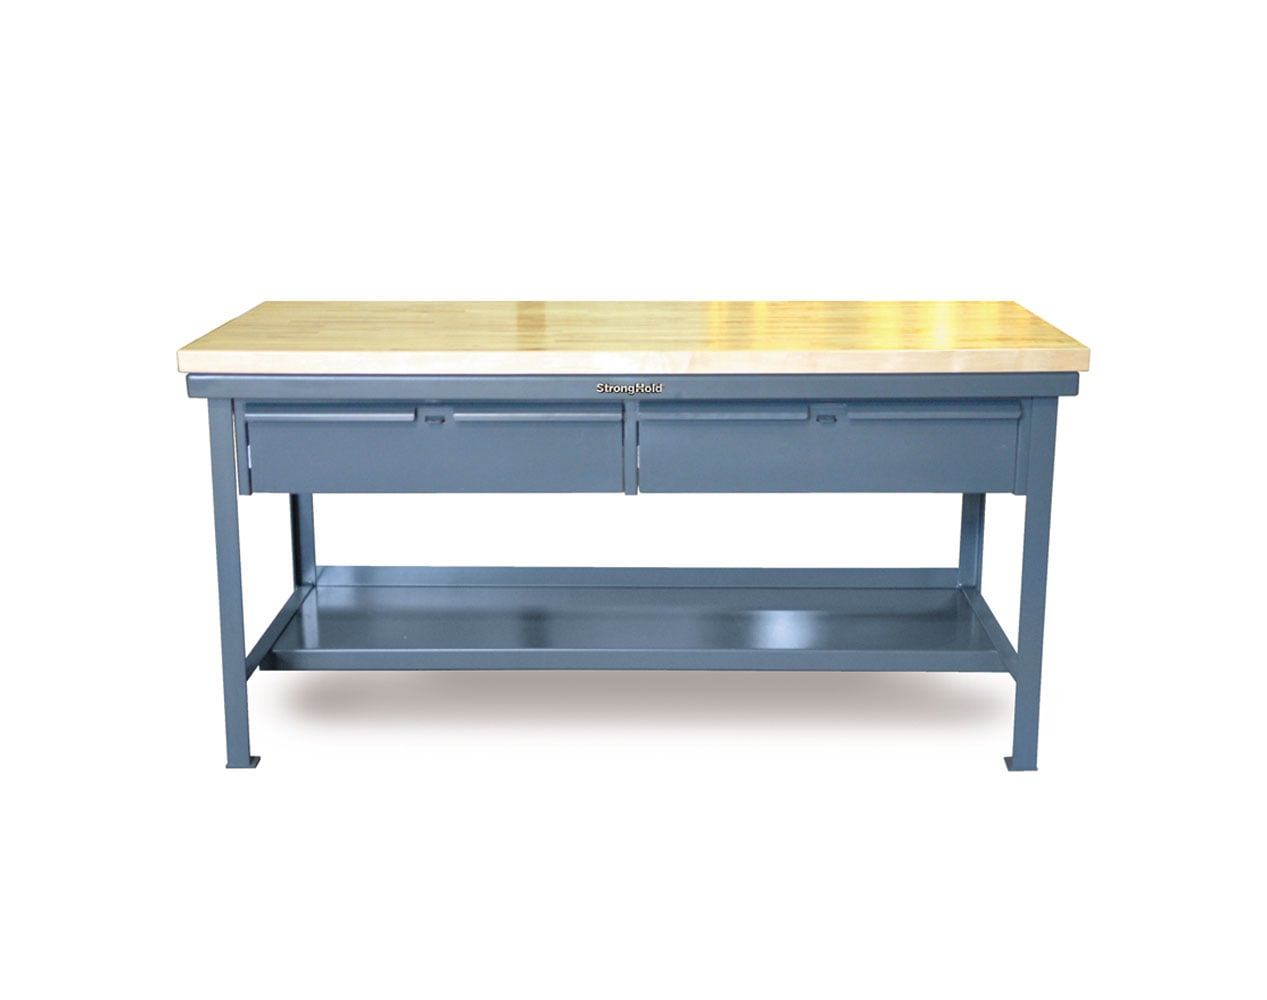 Extreme Duty 7 GA Shop Table with 1 3/4 in. Maple Top, 2 Drawers, 1 Shelf - 72 In. W x 36 In. D x 34 In. H